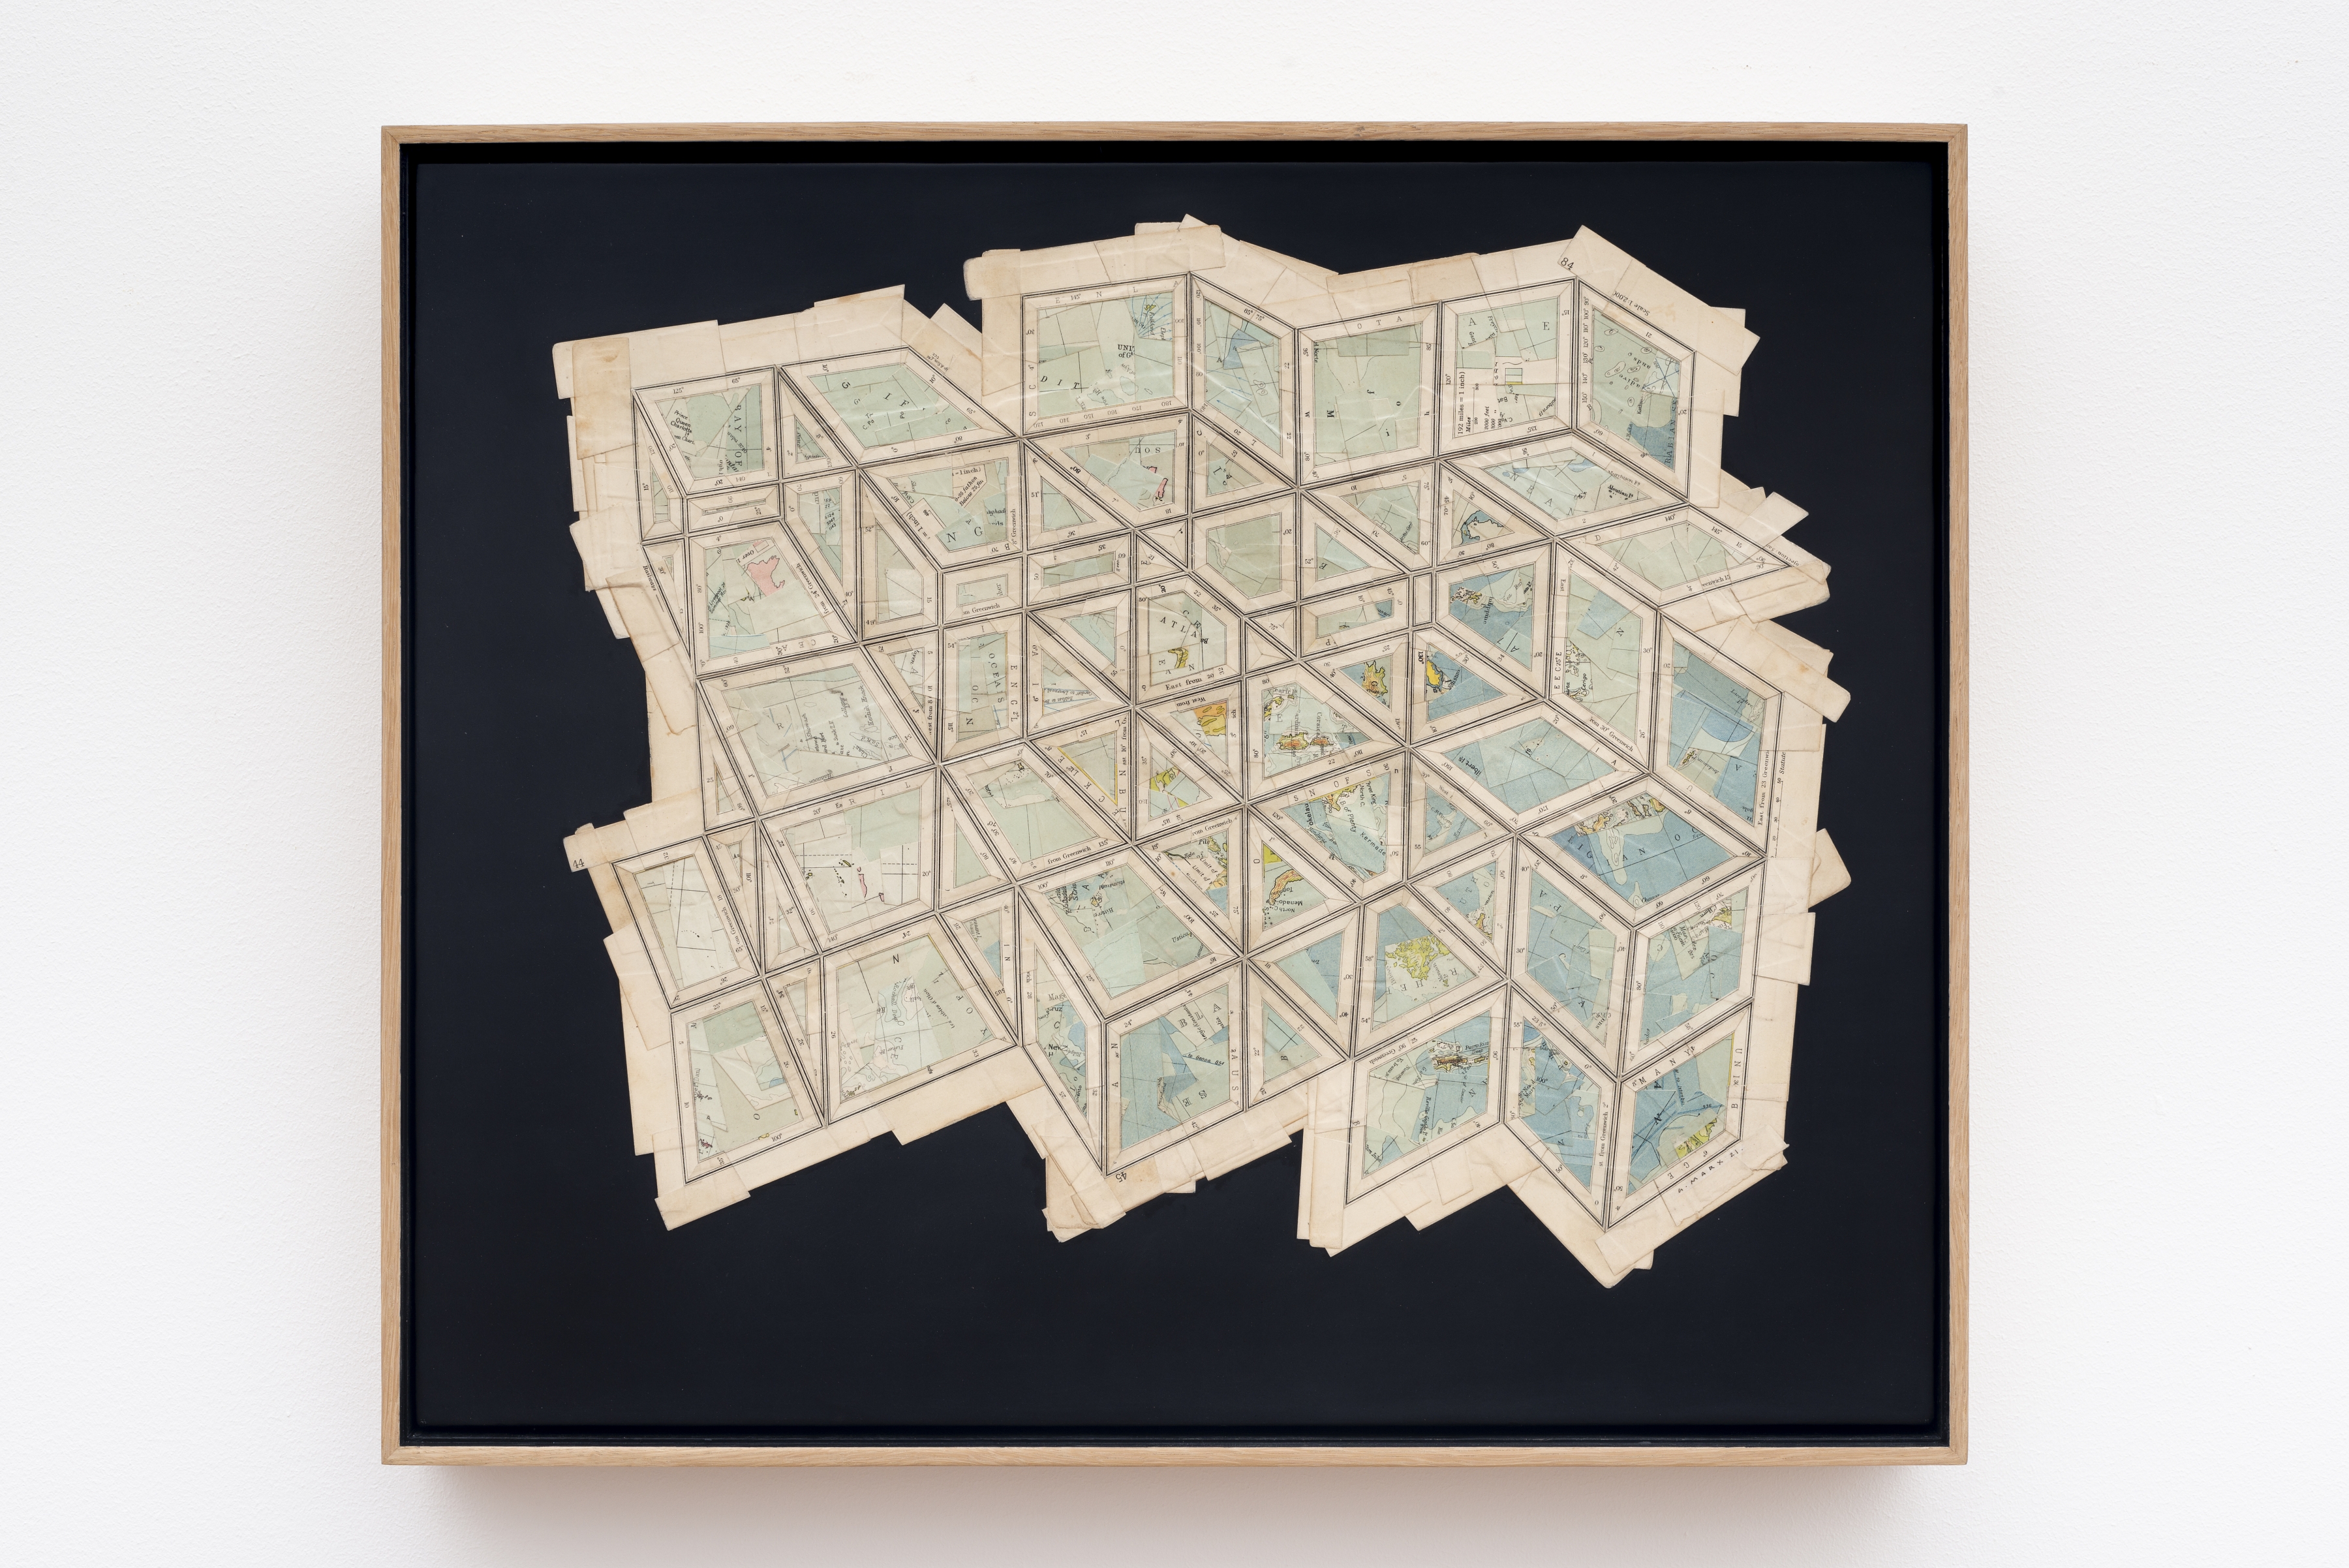 Square Expanse, 2021
Reconfigured map fragments on canvas

53 x 63 x 7.5 cm / 20.8 x 24.8 x 3 in

Enquire

&amp;nbsp;